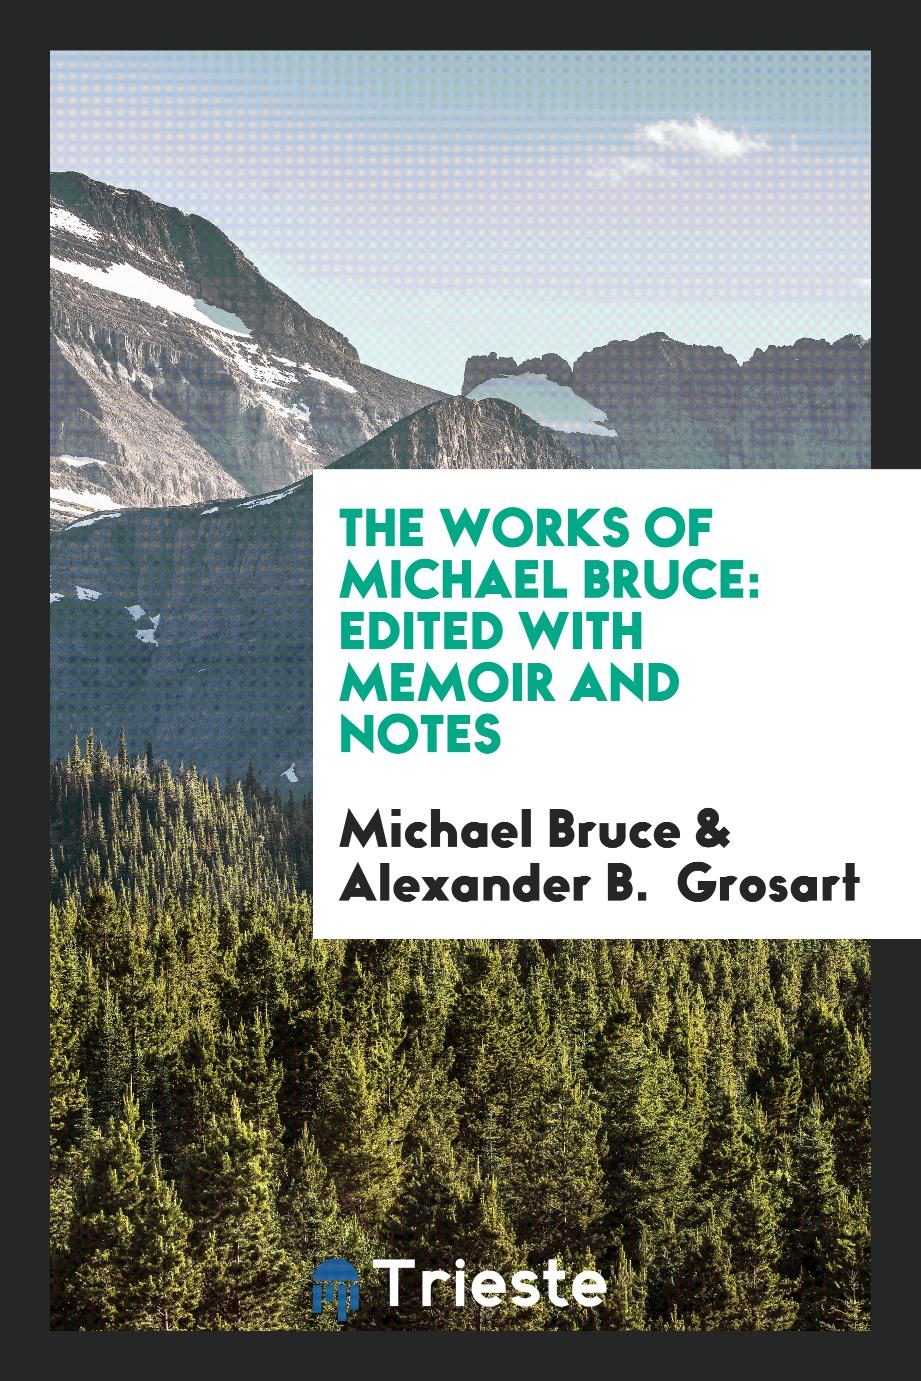 The Works of Michael Bruce: Edited with Memoir and Notes